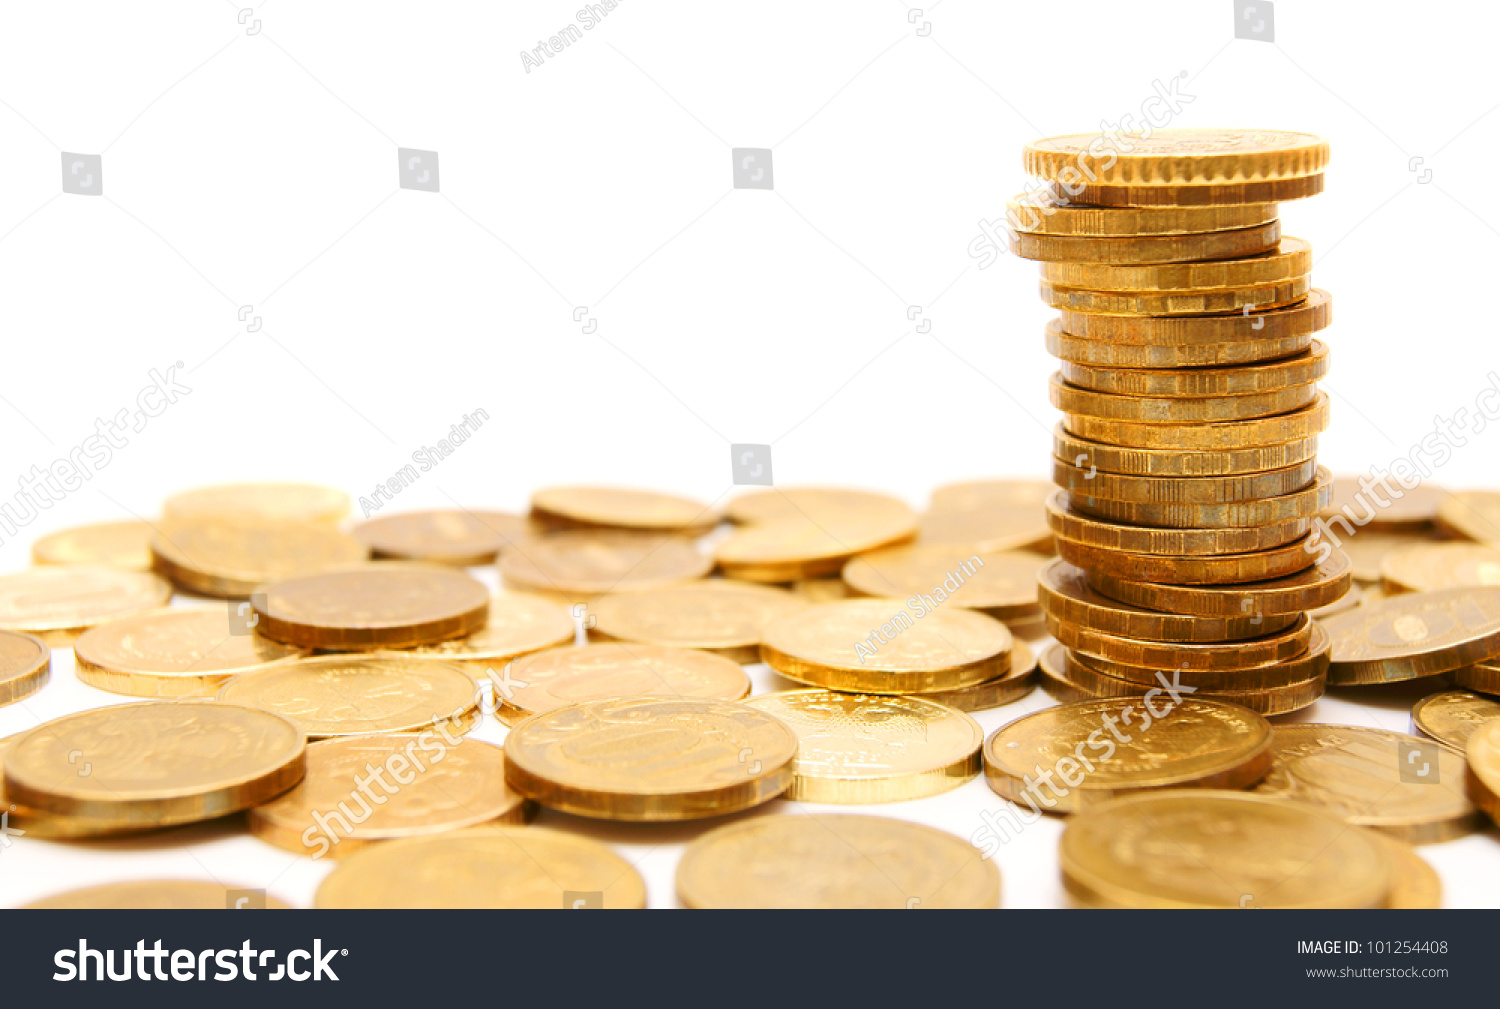 Gold Coins. On A White Background. Stock Photo 101254408 : Shutterstock